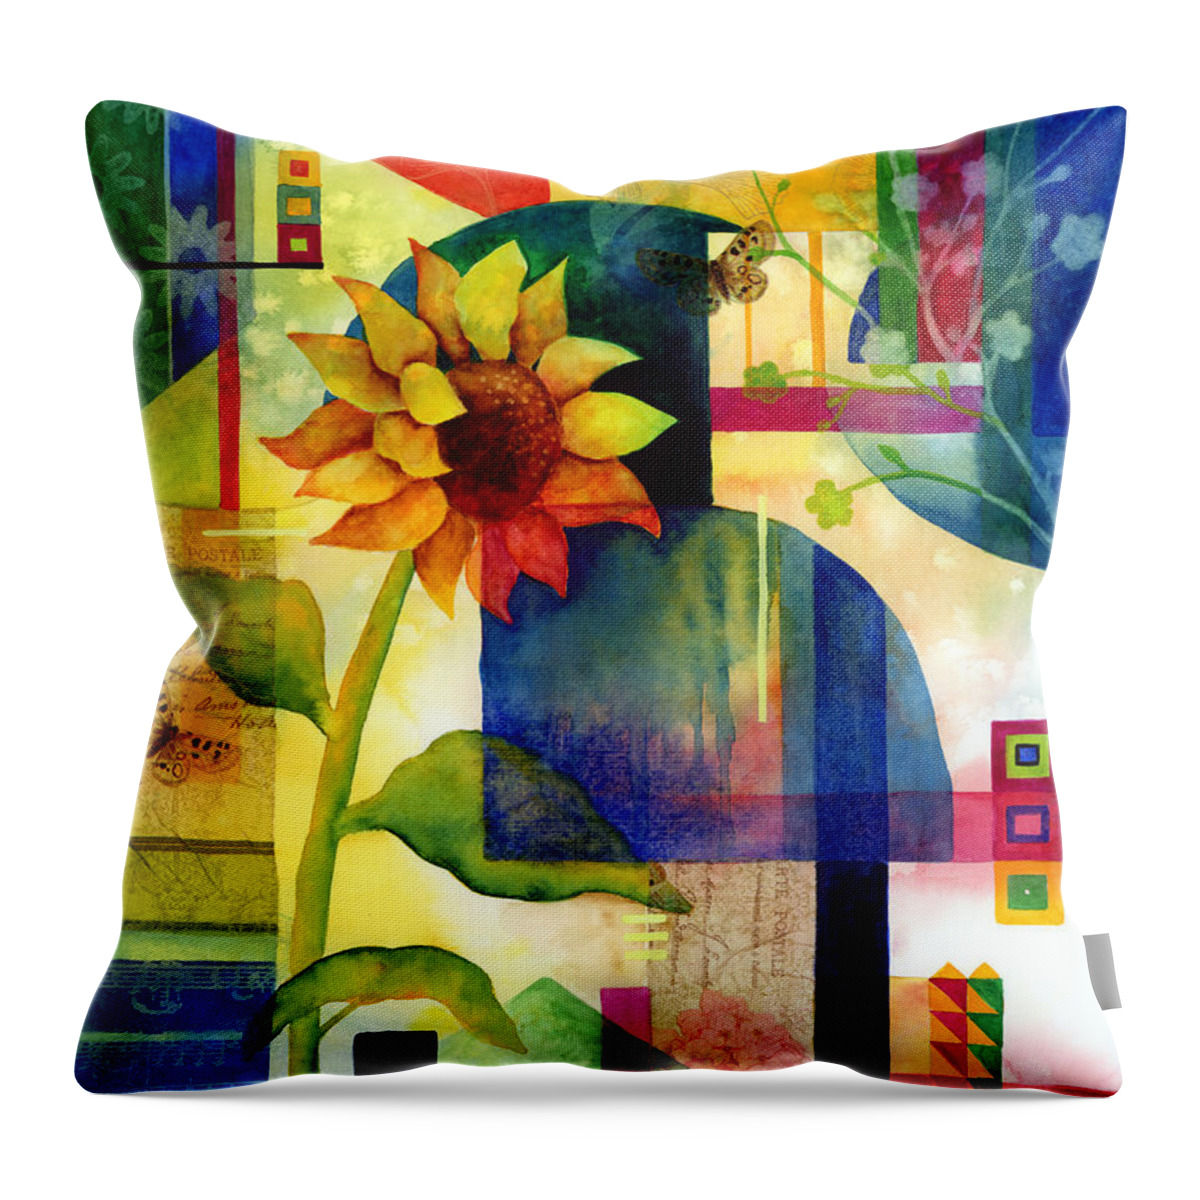 Sunflower Throw Pillow featuring the painting Sunflower Collage by Hailey E Herrera